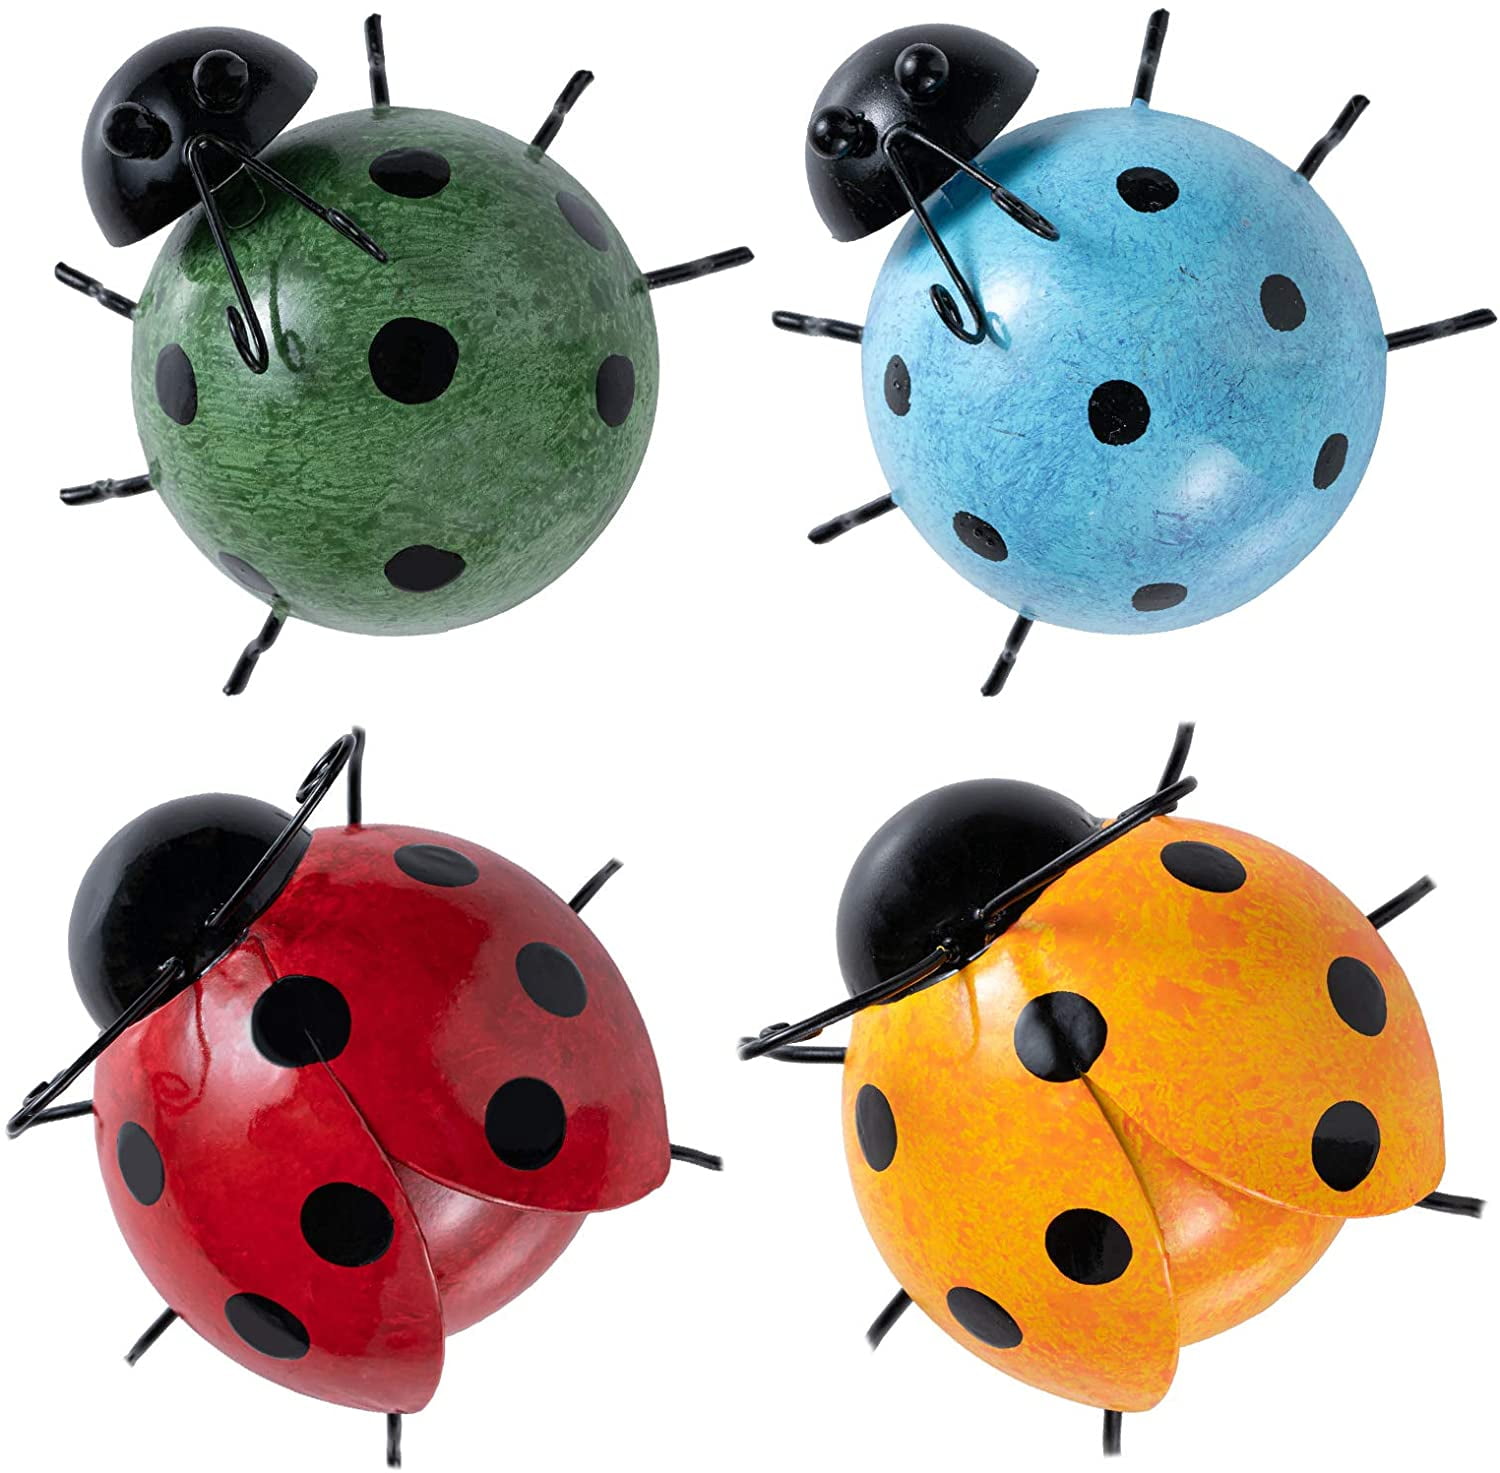 Metal Ladybugs Outdoor Decor Garden Clearance Yard Fence Decorations 4 PCS Colorful Cute Ladybirds Hanging Wall Sculpture for Outside Patio Backyard Tree Porch 